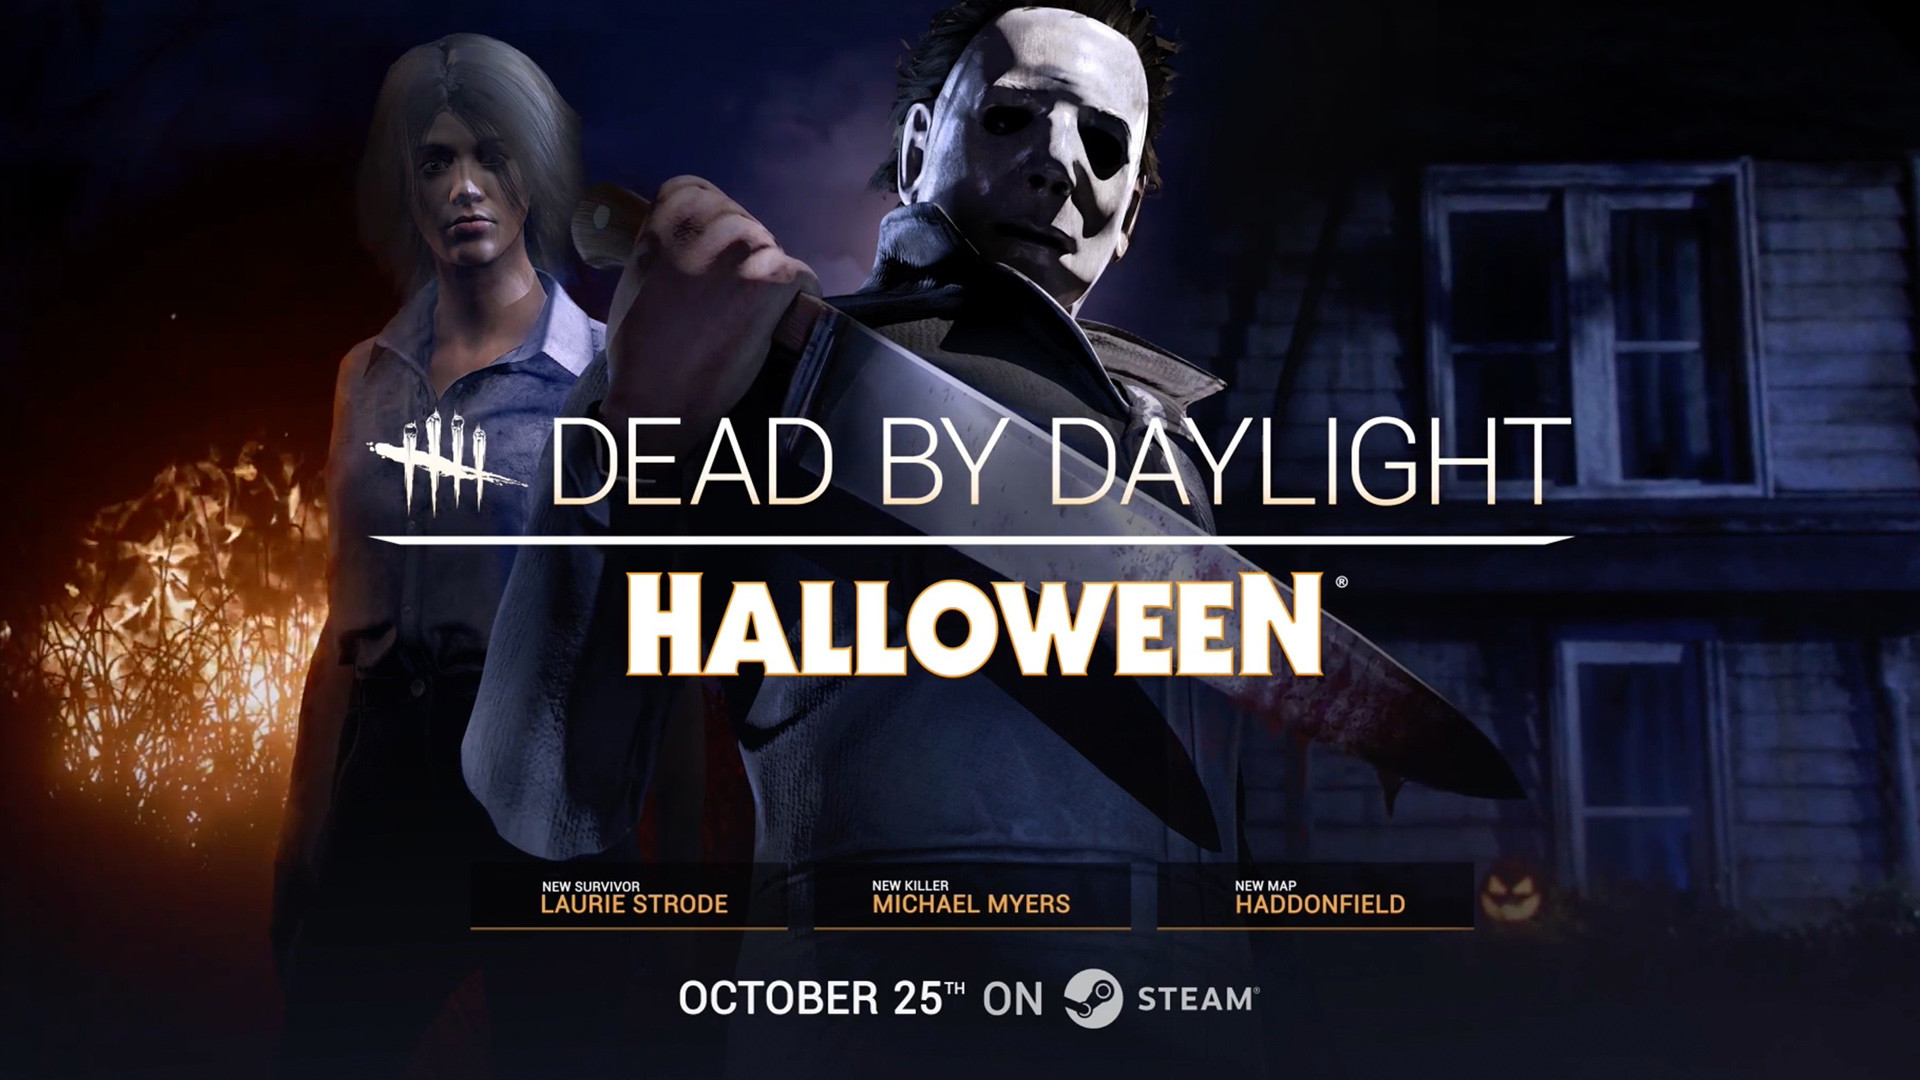 Dead by Daylights Halloween update goes live today